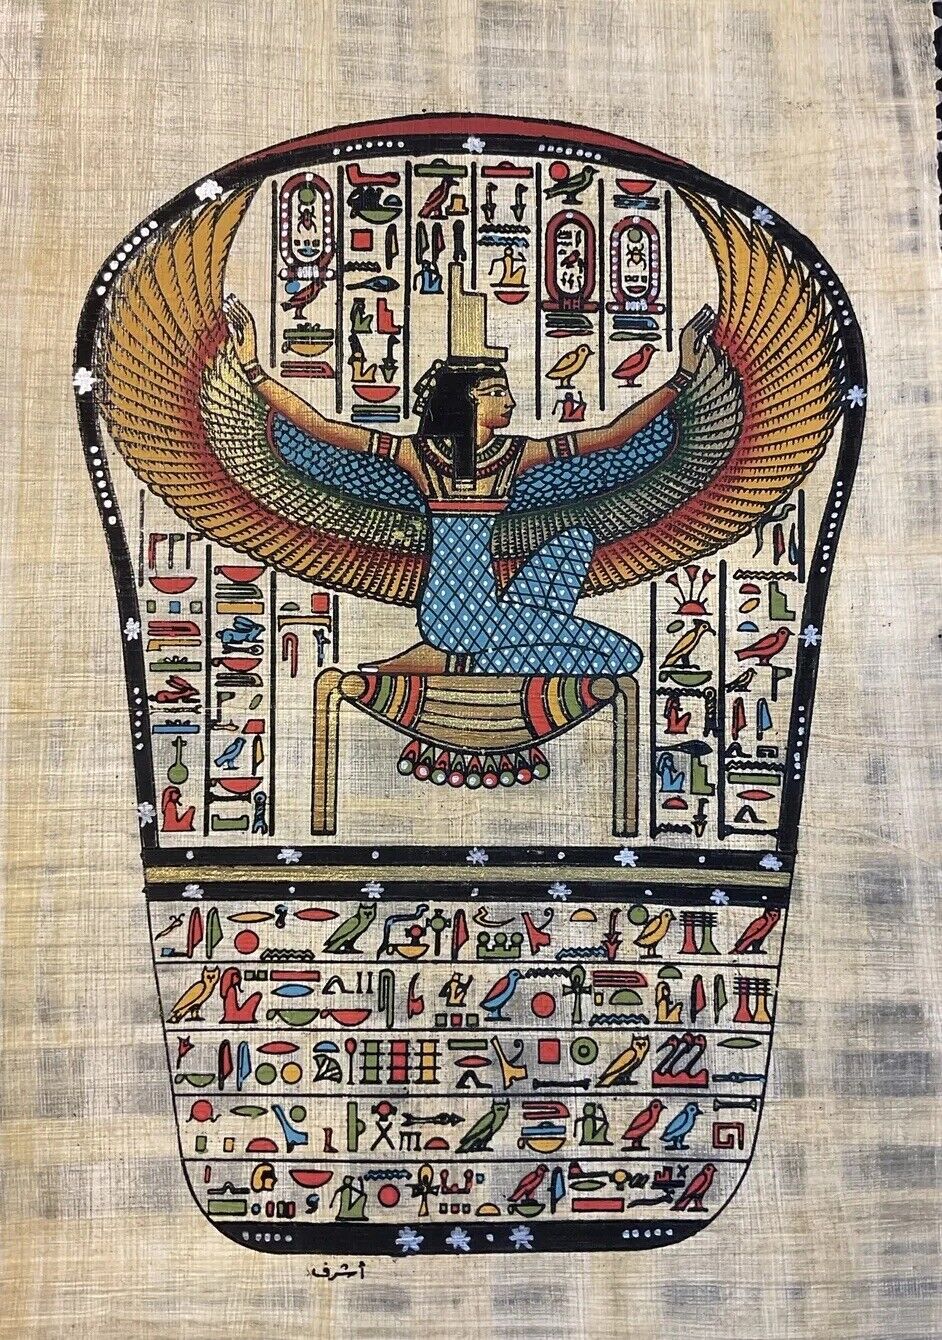 Rare Authentic Hand Painted Ancient Egyptian Papyrus- IsisGoddess - 8x12 Inch